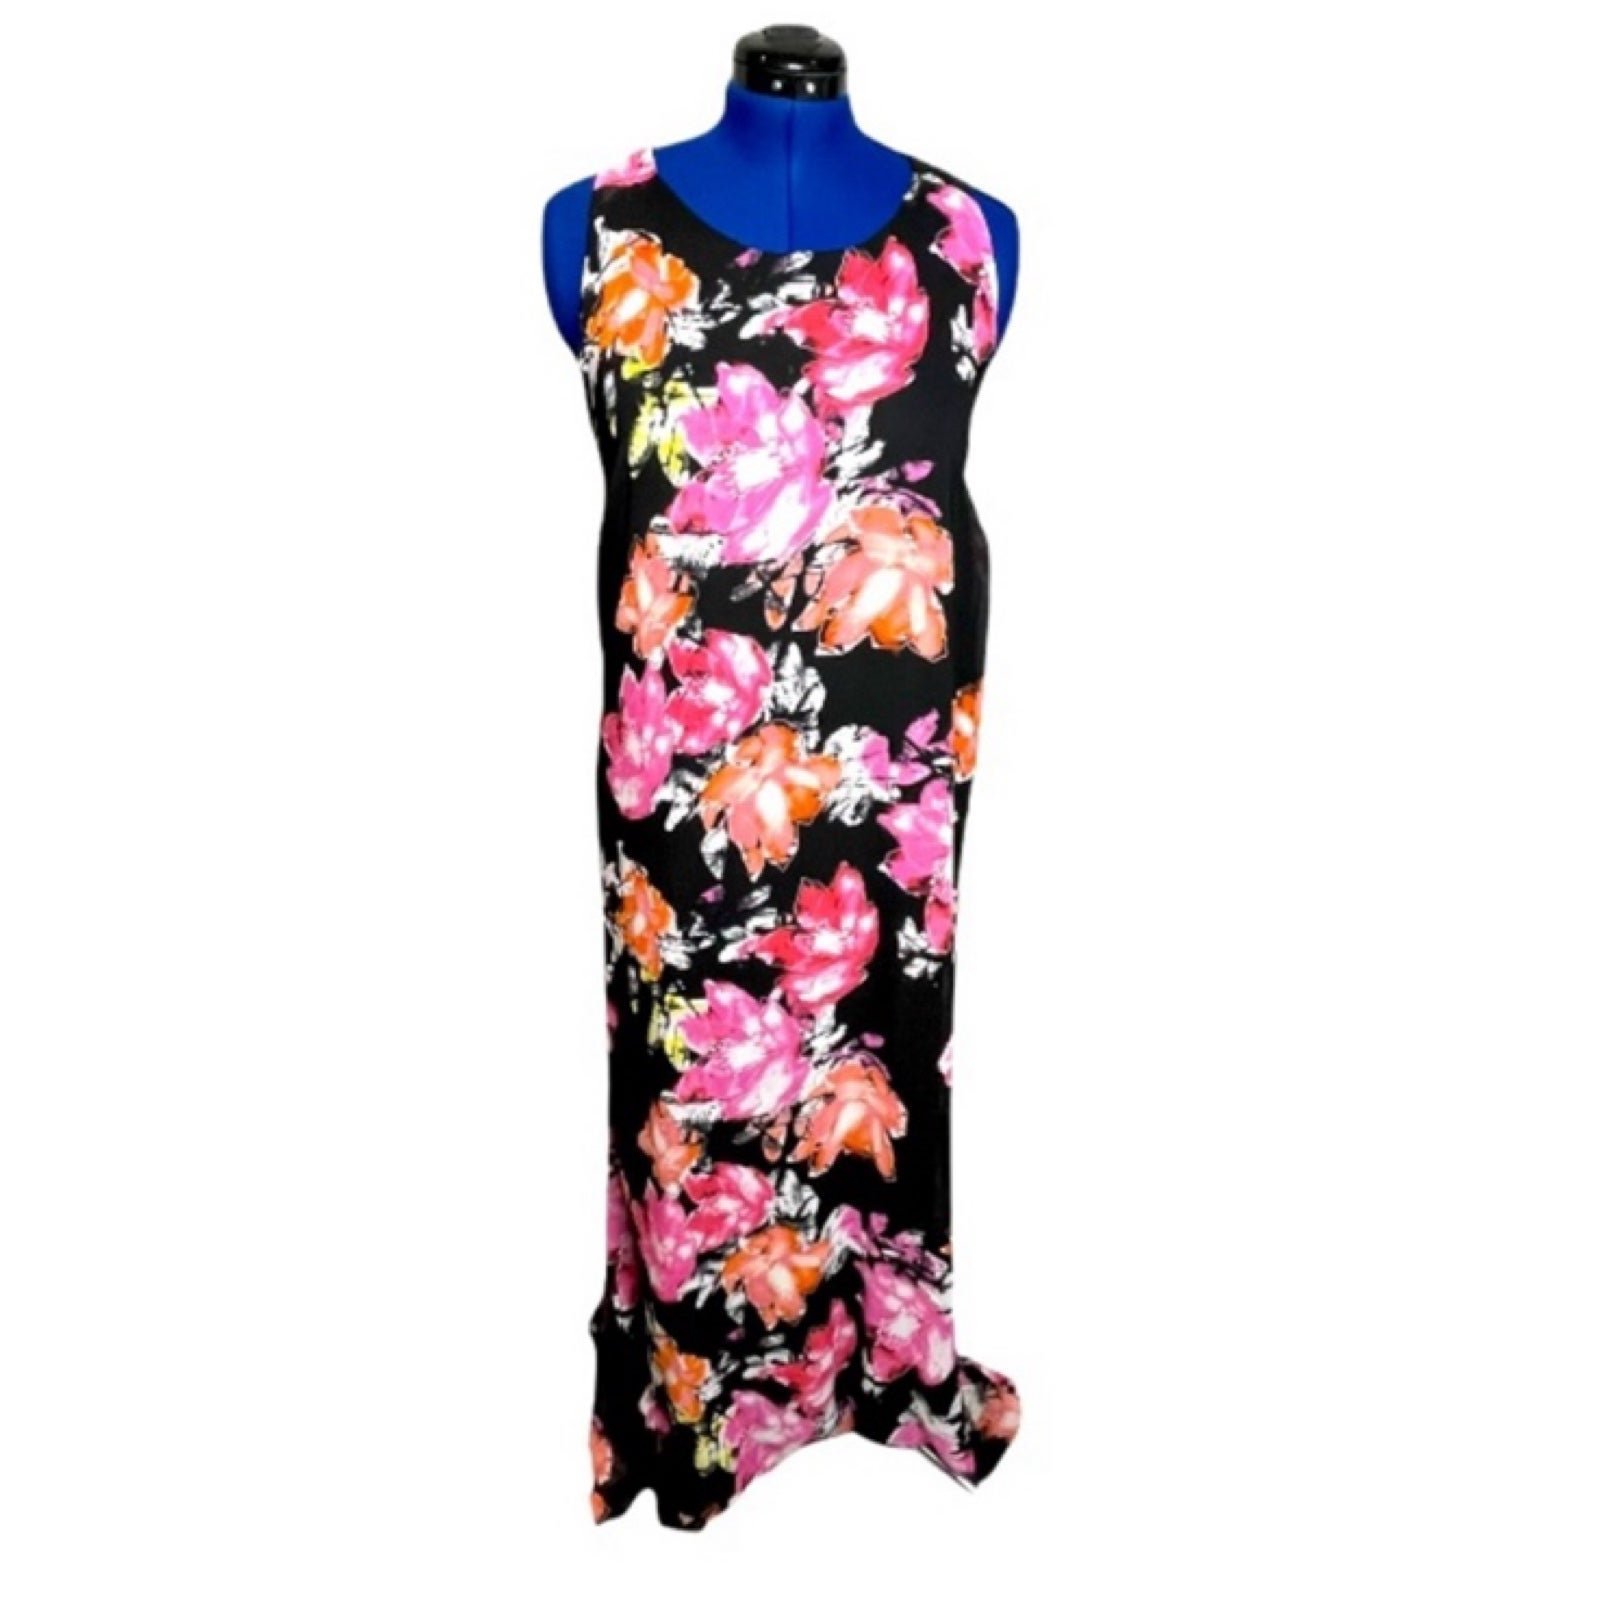 Gorgeous Simply Be US28 black bright floral racer back 